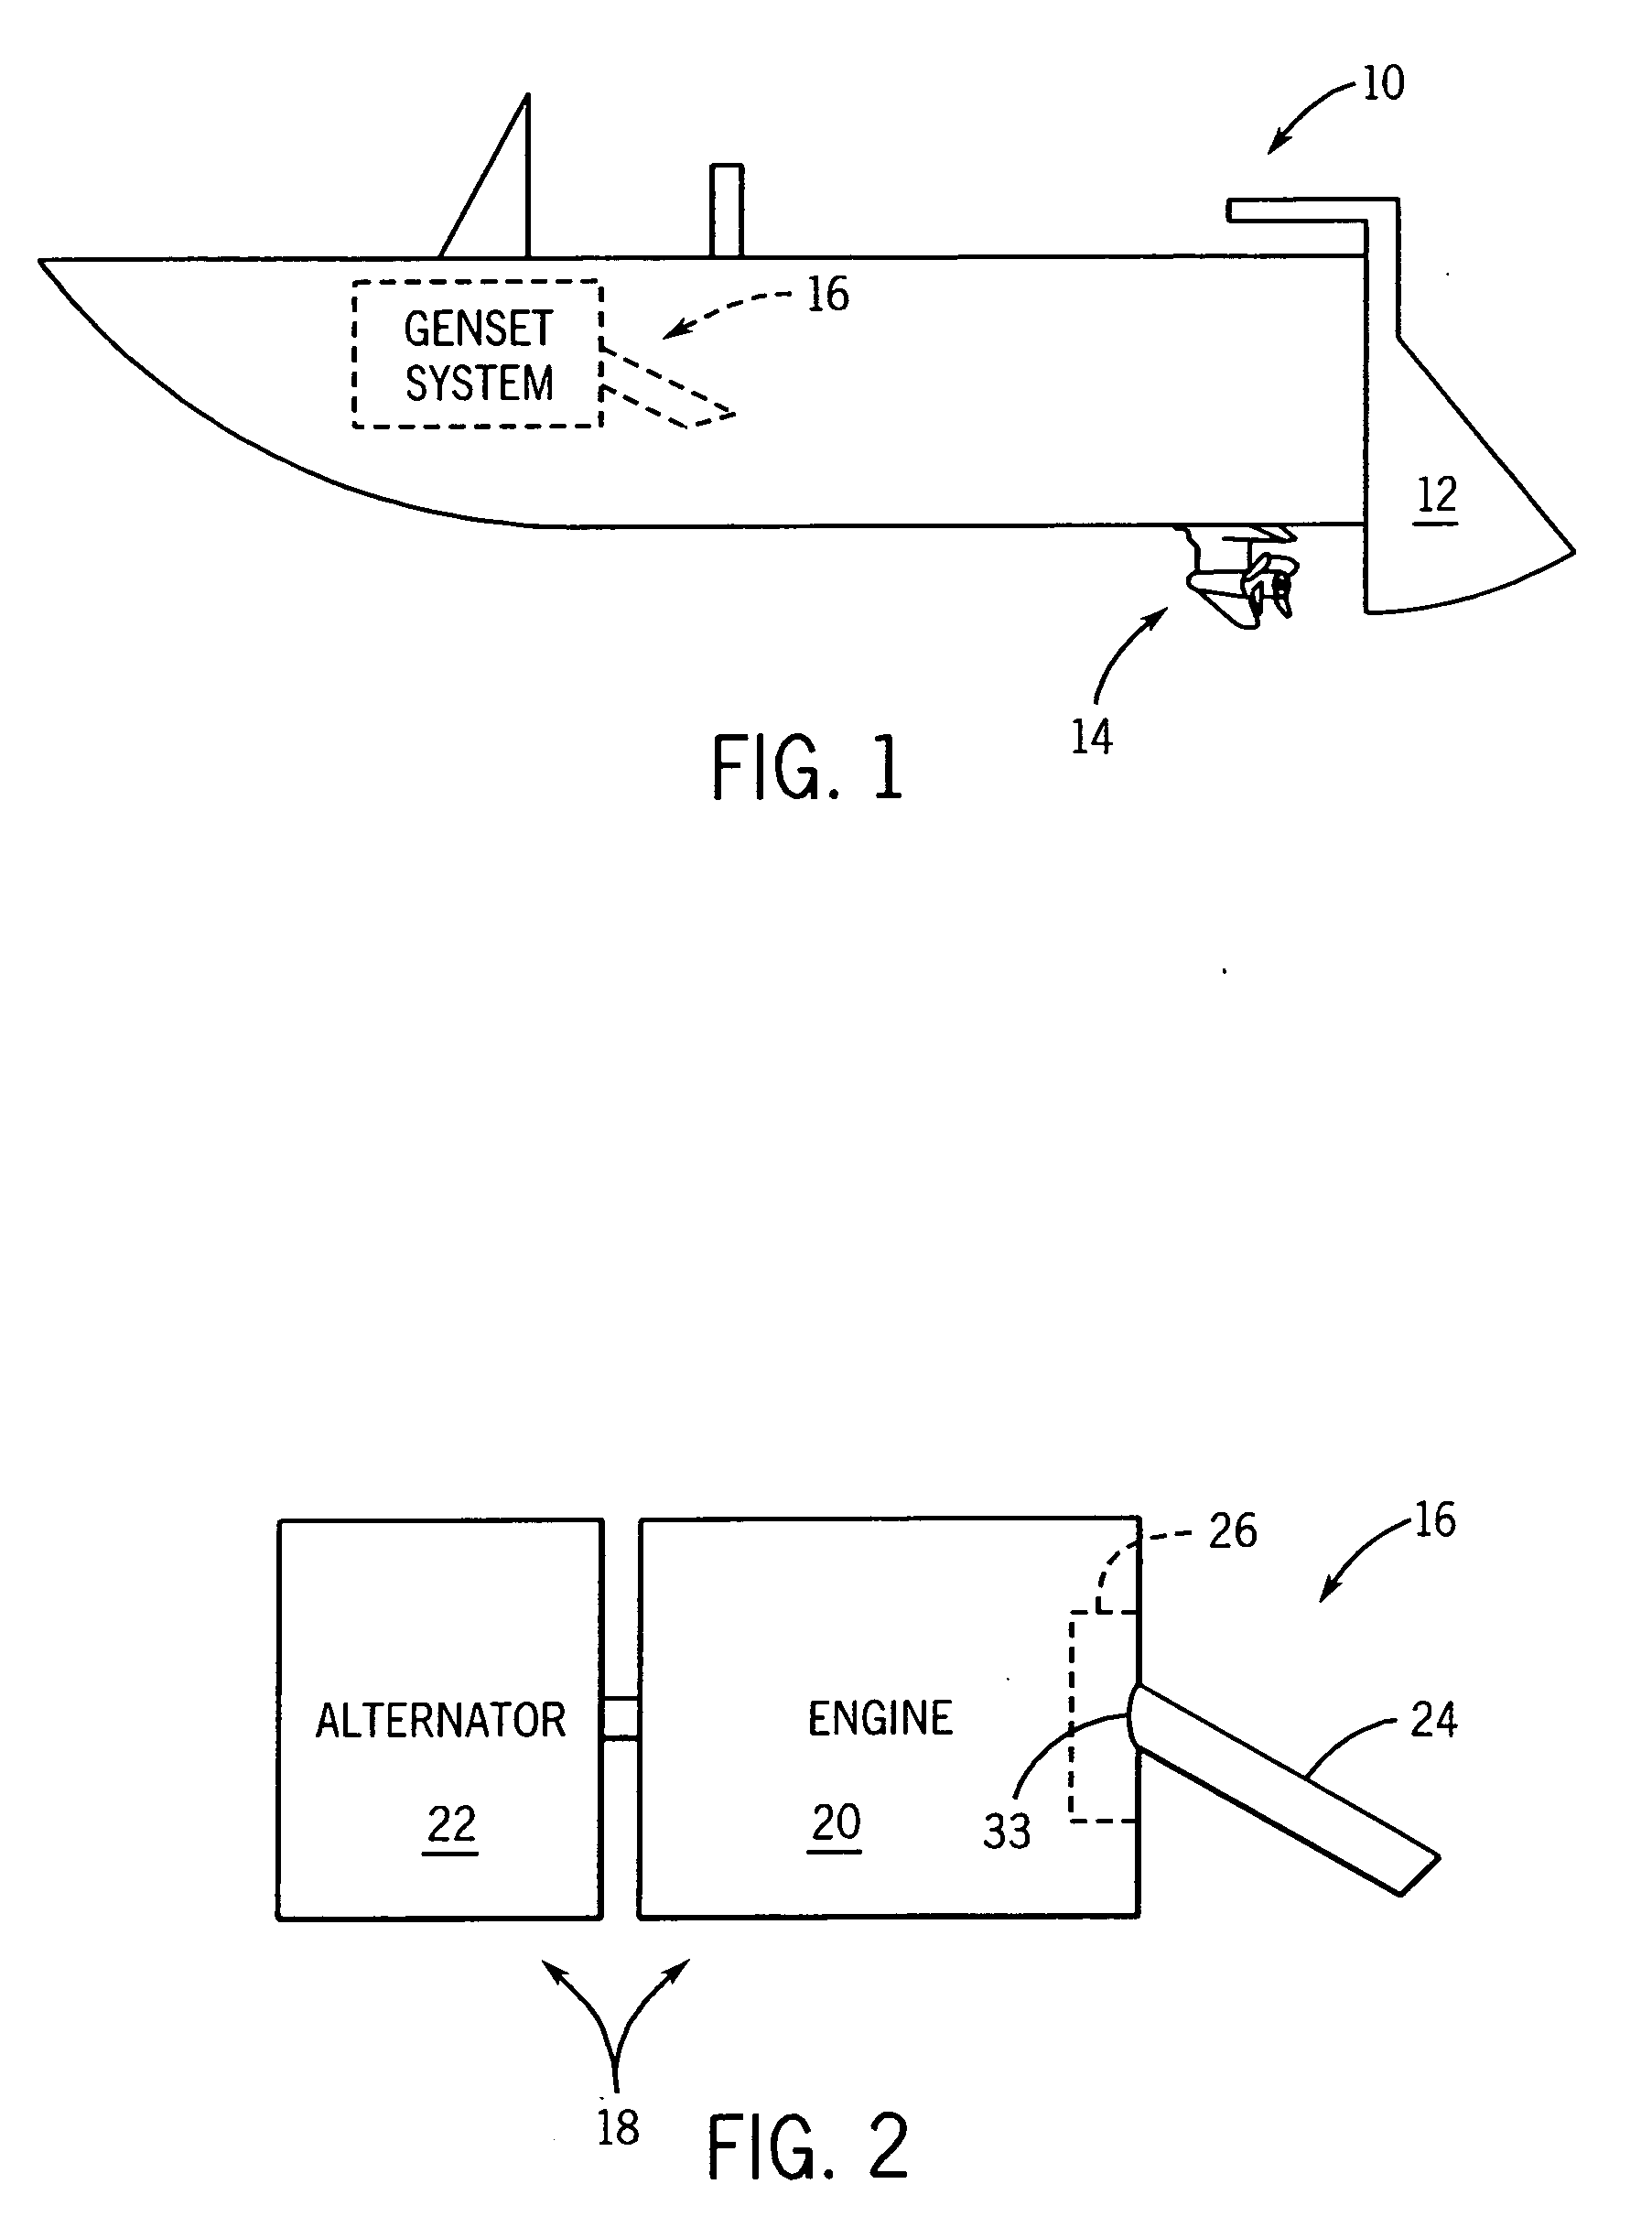 Generator set exhaust processing system and method